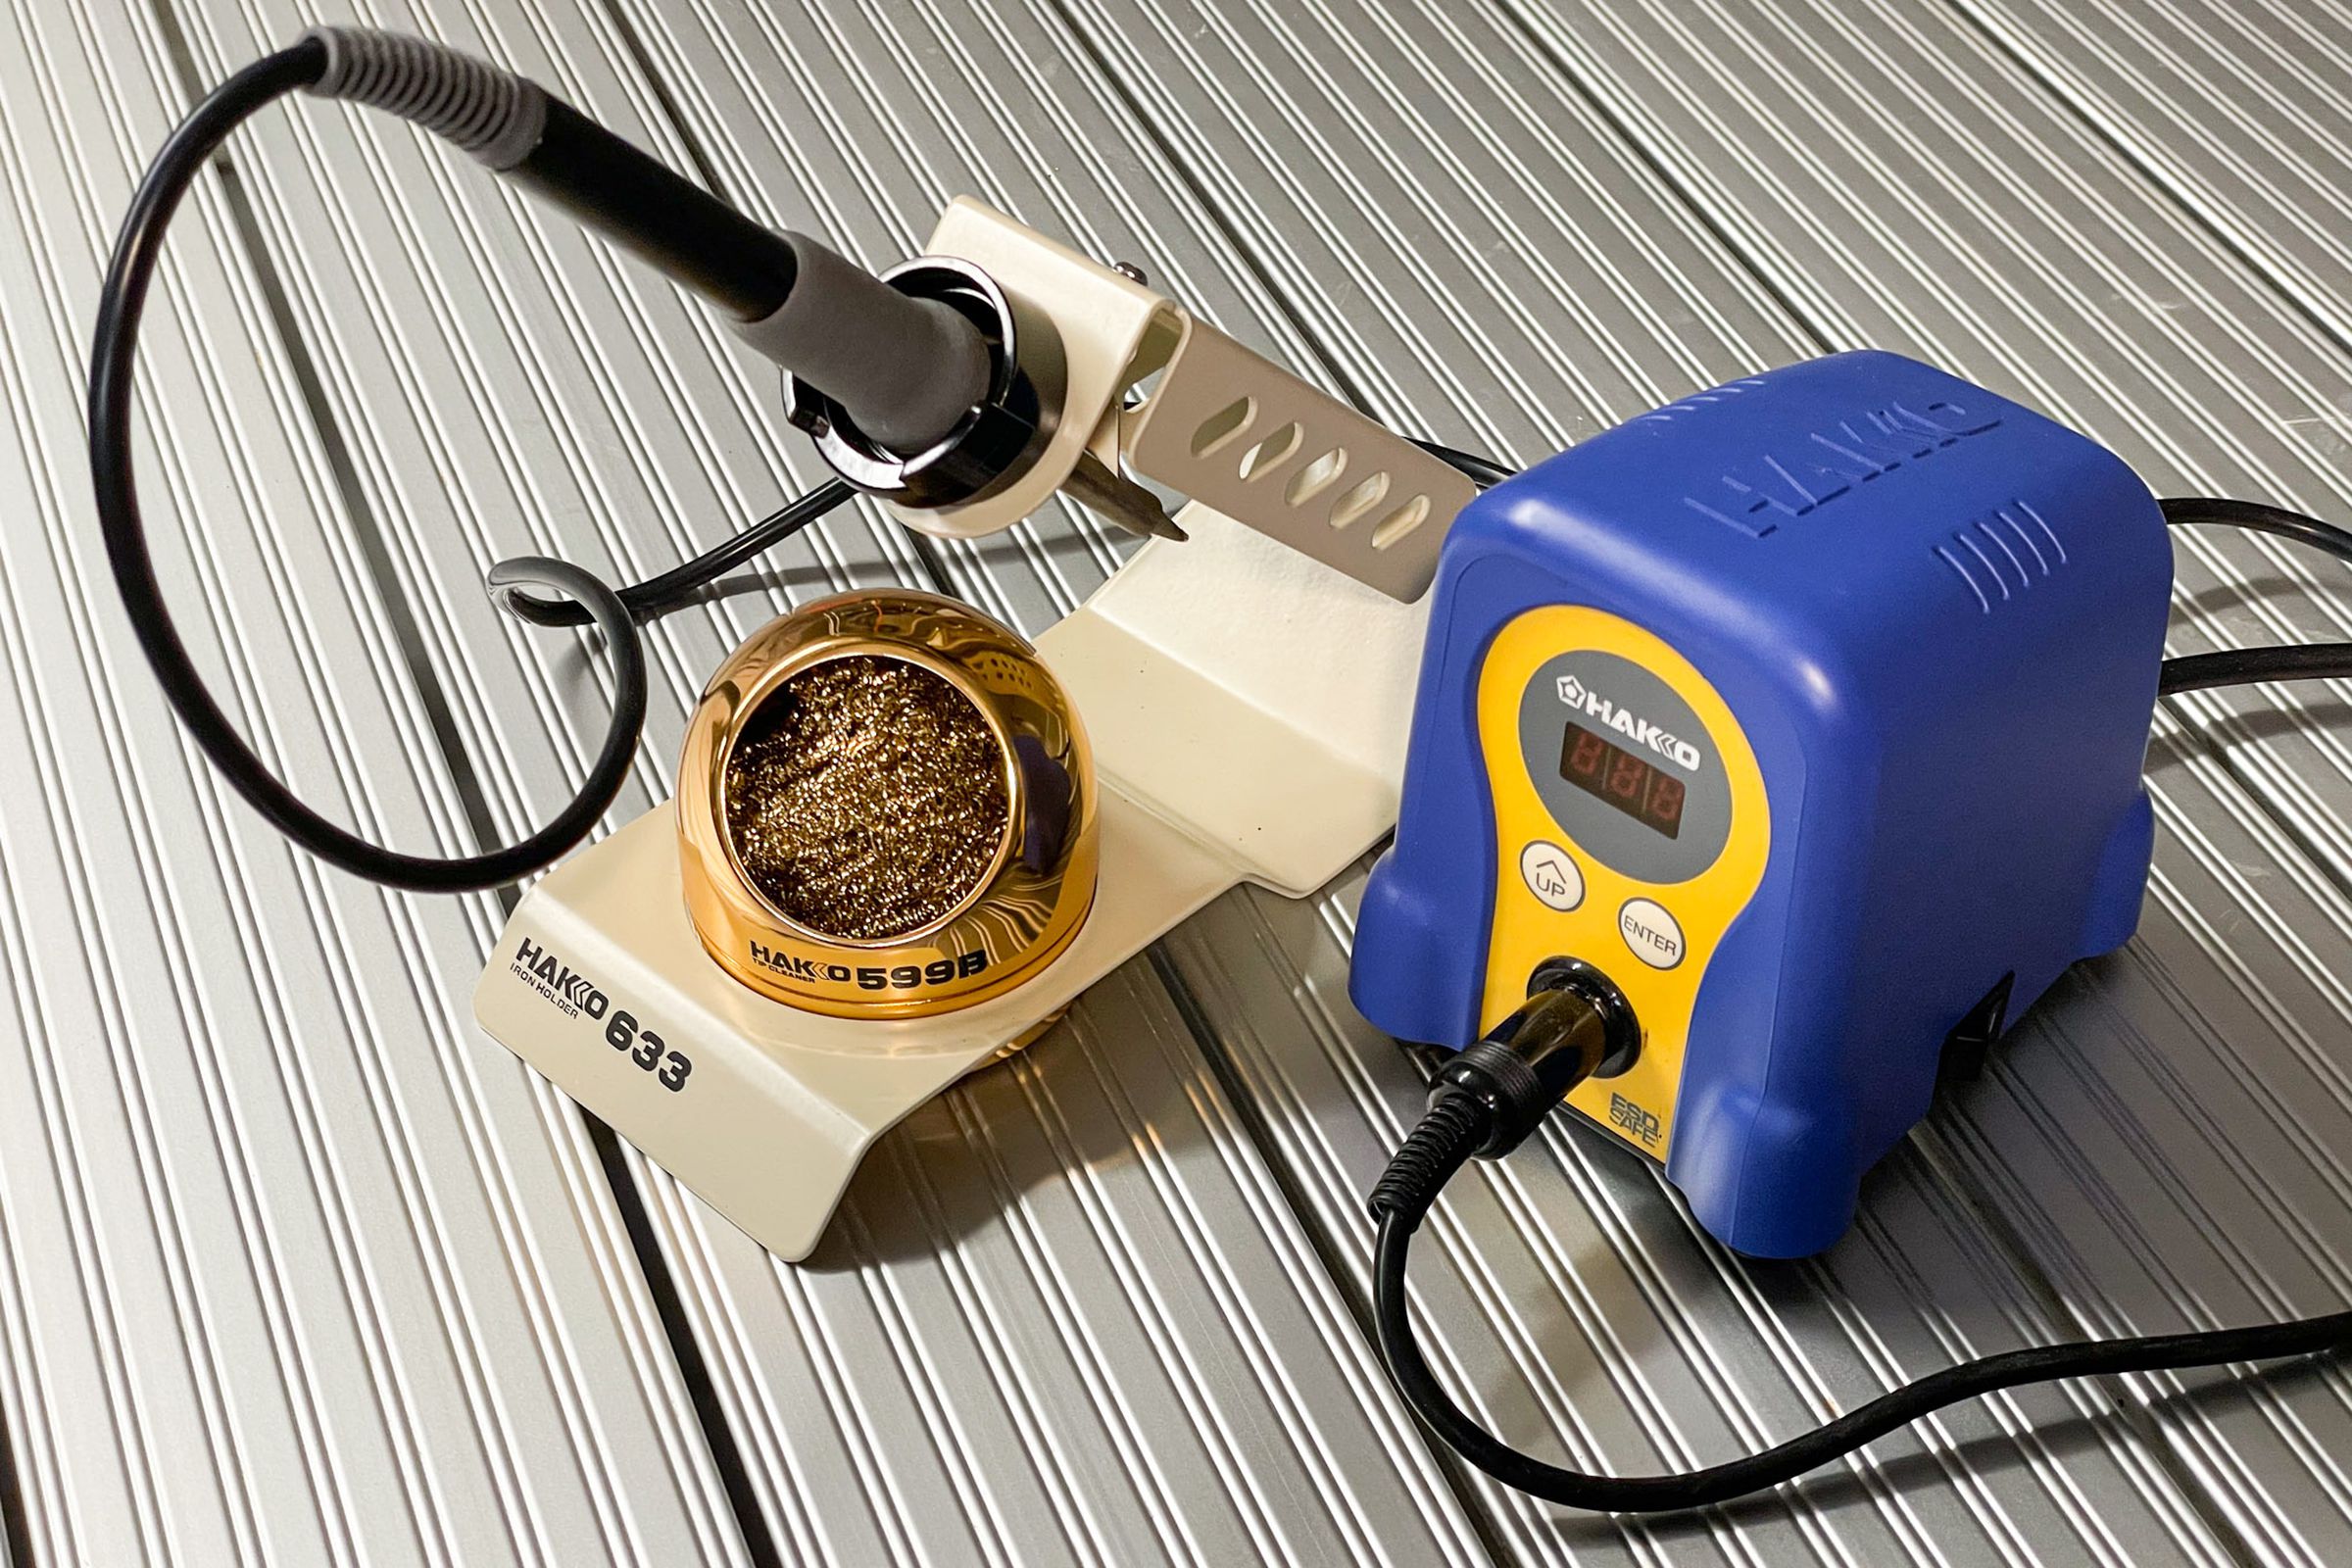 A picture of a Hakko brand soldering iron and a tan Hakko Iron holder.